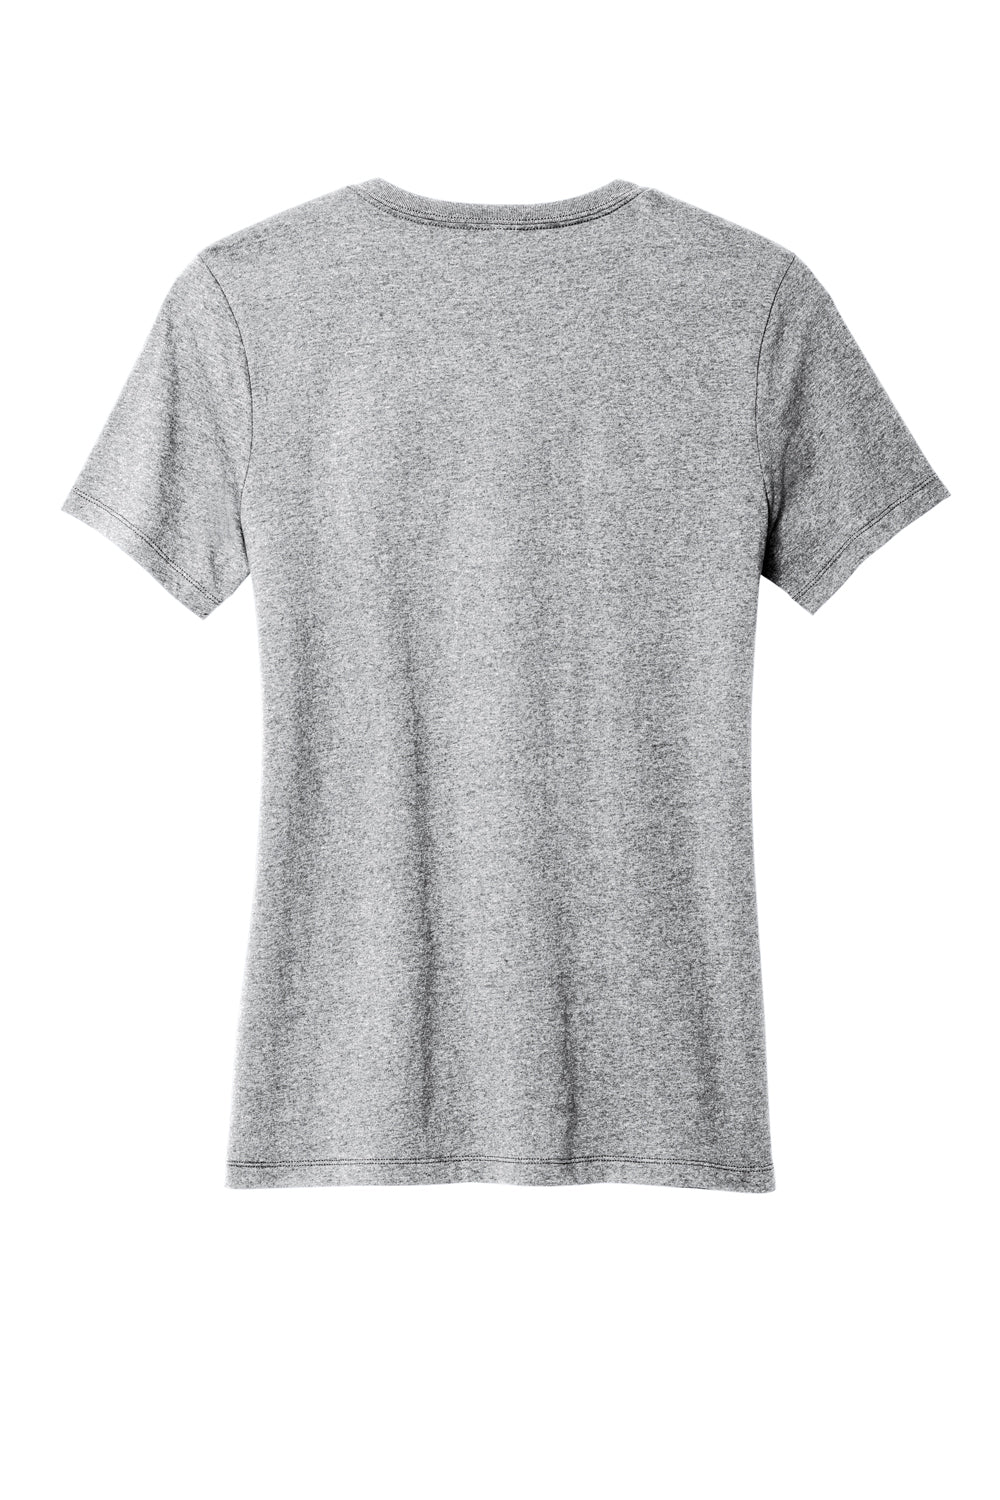 Allmade AL2303 Womens Recycled Short Sleeve V-Neck T-Shirt Heather Remade Grey Flat Back